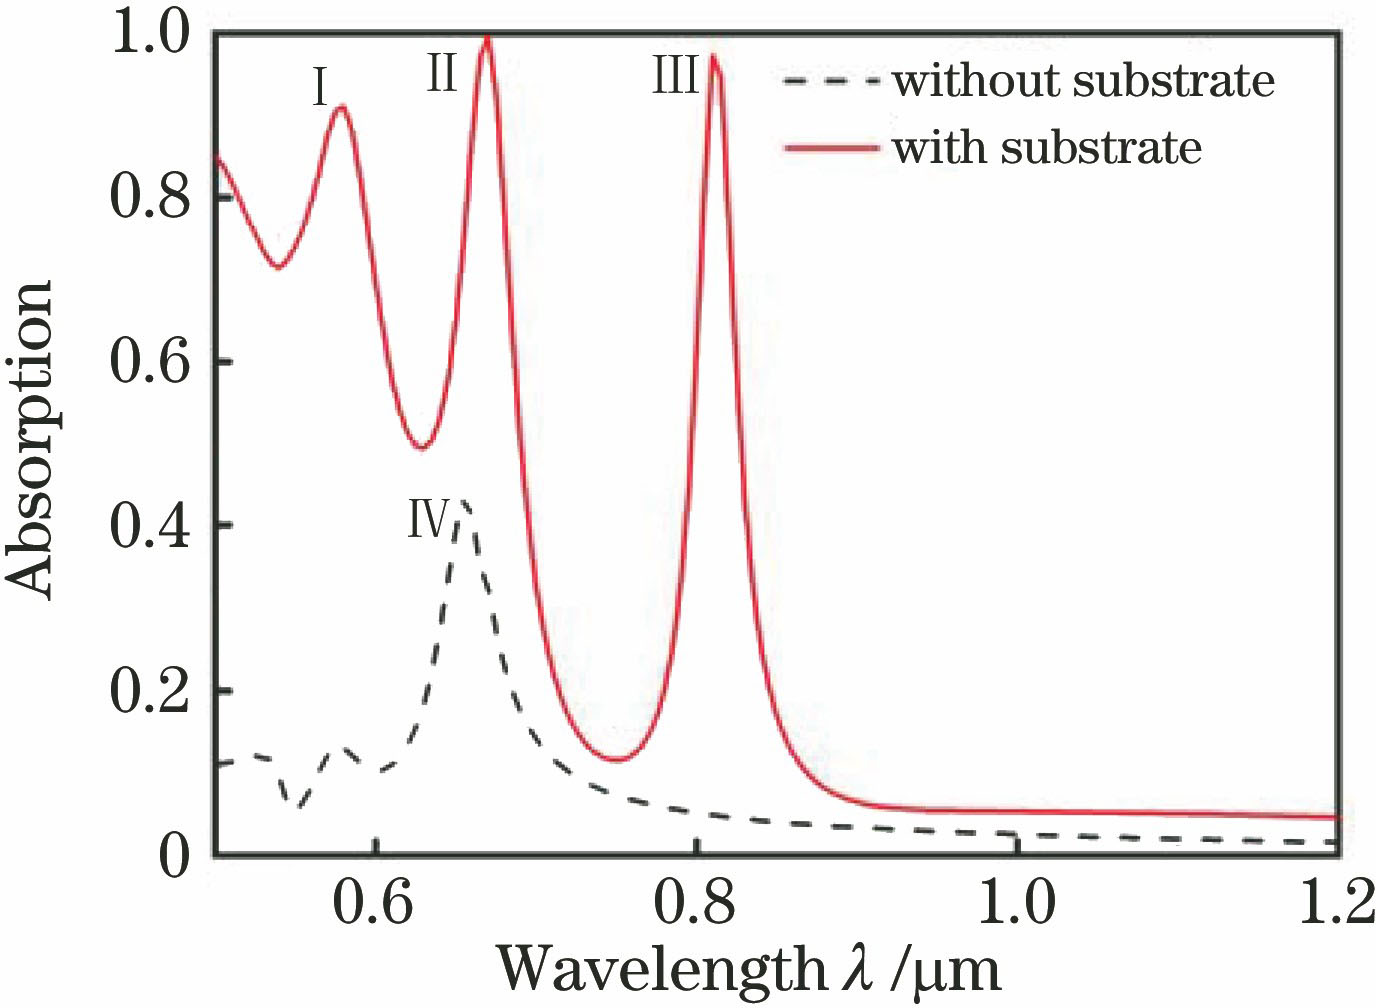 Absorption spectra with gold substrate (solid line) and without gold substrate (dotted line)